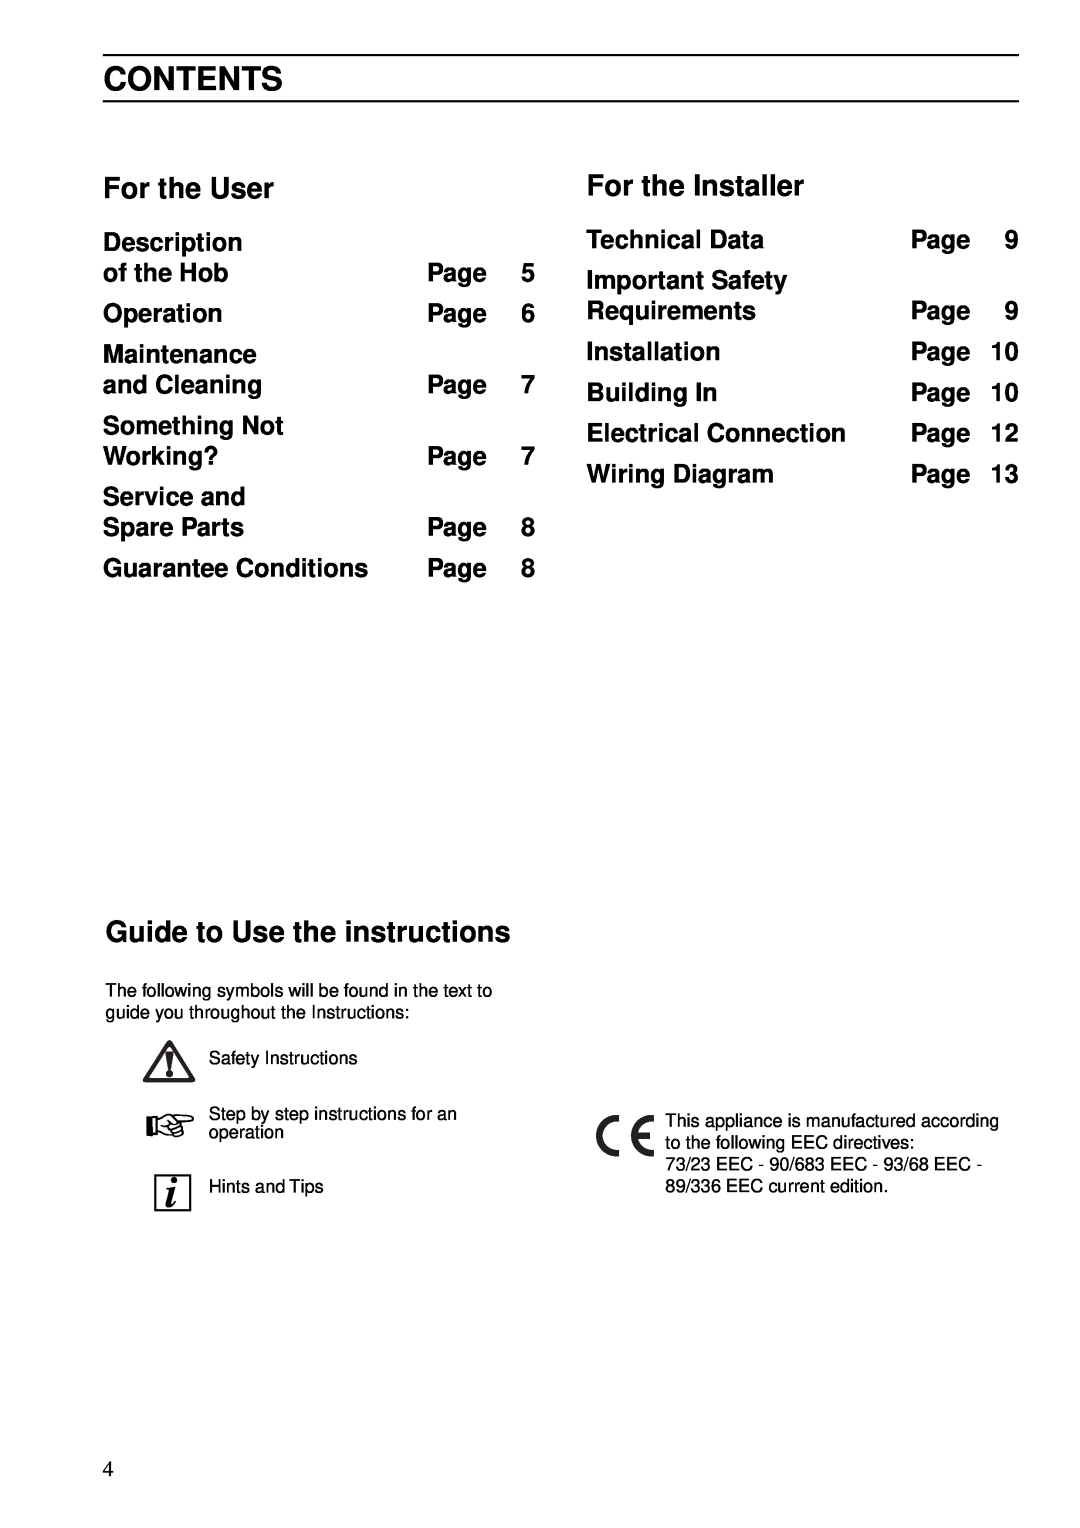 Zanussi Cook Plate manual Contents, For the User, For the Installer, Guide to Use the instructions 